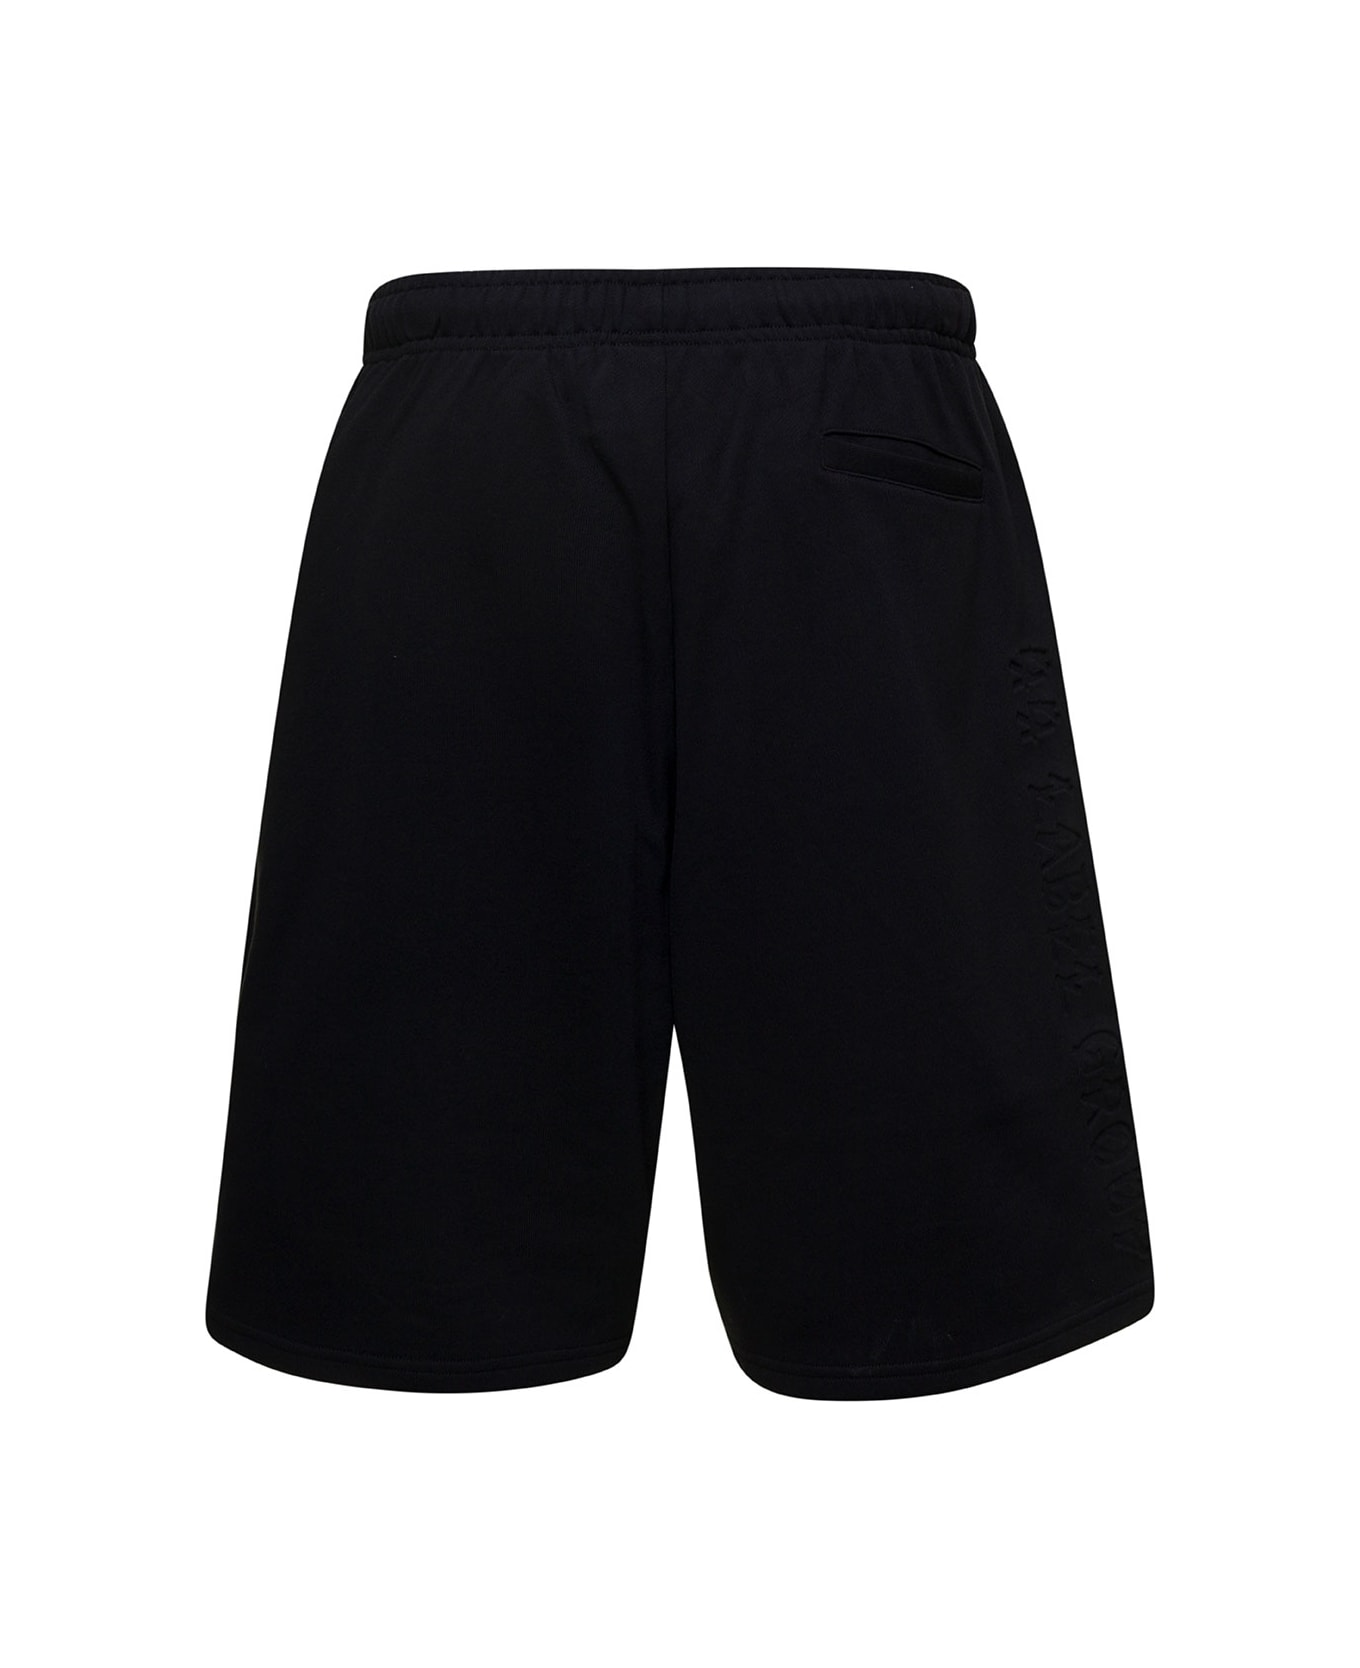 44 Label Group Black Shorts With Logo Print In Cotton Man - Black